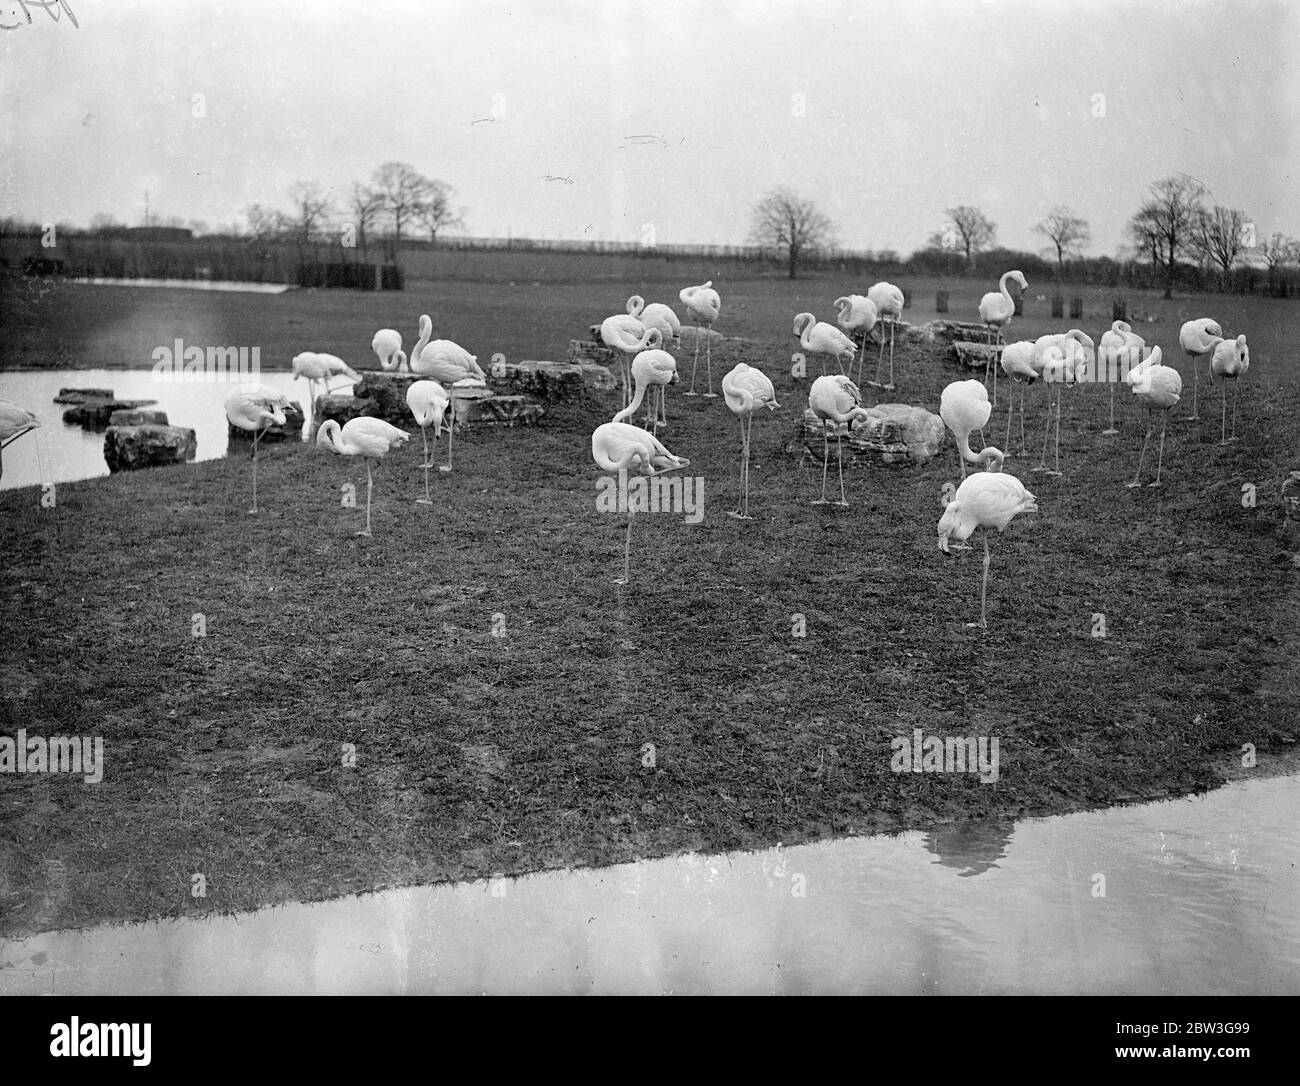 Flamingoes in their new quarters at Whipsnade . The flamingoes at the Whipsnade Zoo are now making themselves at home in the new quarters to which they have just moved . Photo shows , Flamingoes ' toilet time in their new quarters at Whipsnade . 11 April 1936 Stock Photo